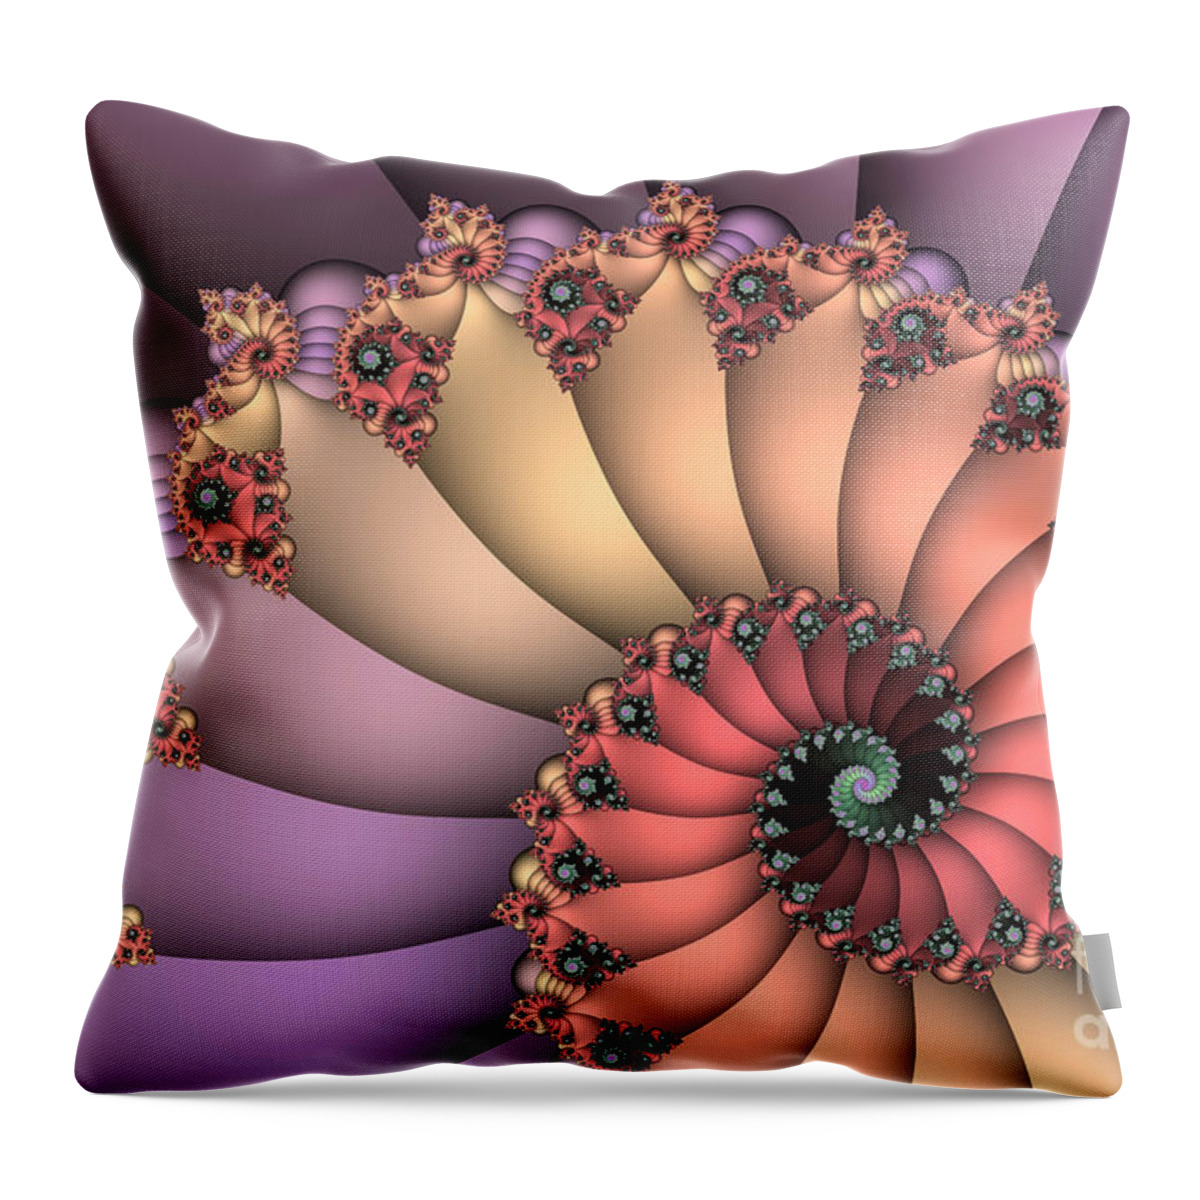 Fractal Throw Pillow featuring the digital art In the Old Days by Jutta Maria Pusl